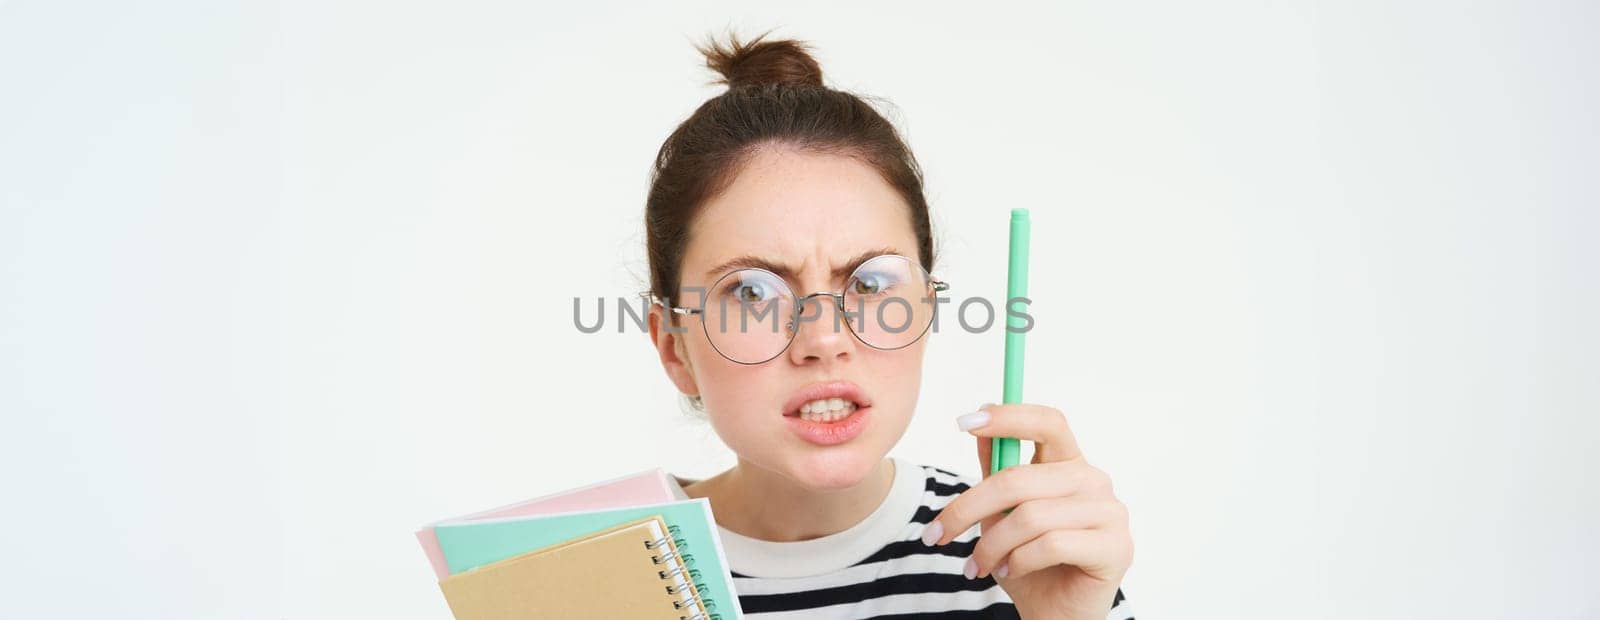 Portrait of angry woman in glasses, teacher scolding someone, shaking pen and arguing, holding notebooks, standing over white background.